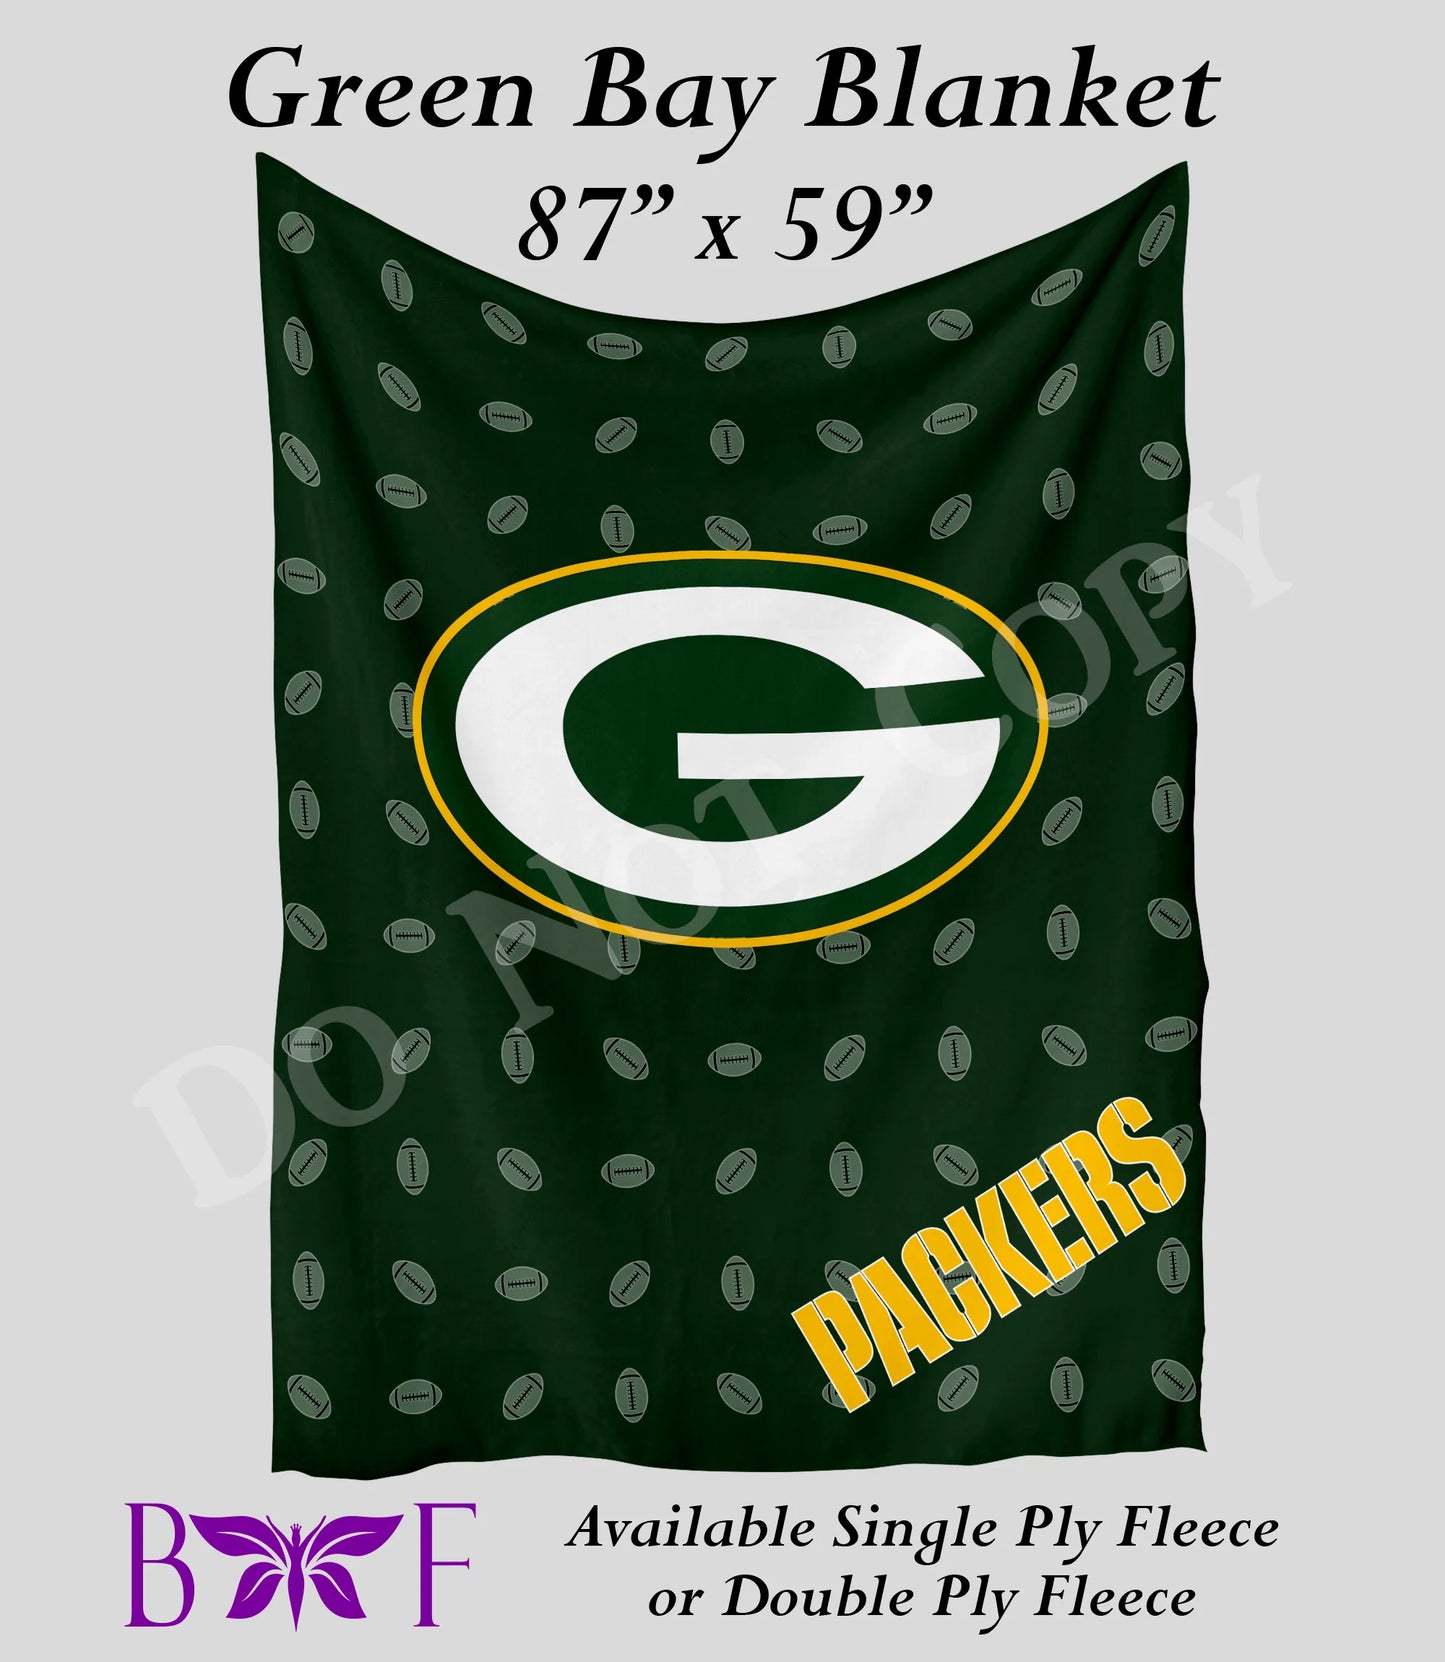 Green Bay 59"x87" soft blanket also available with sherpa fleece